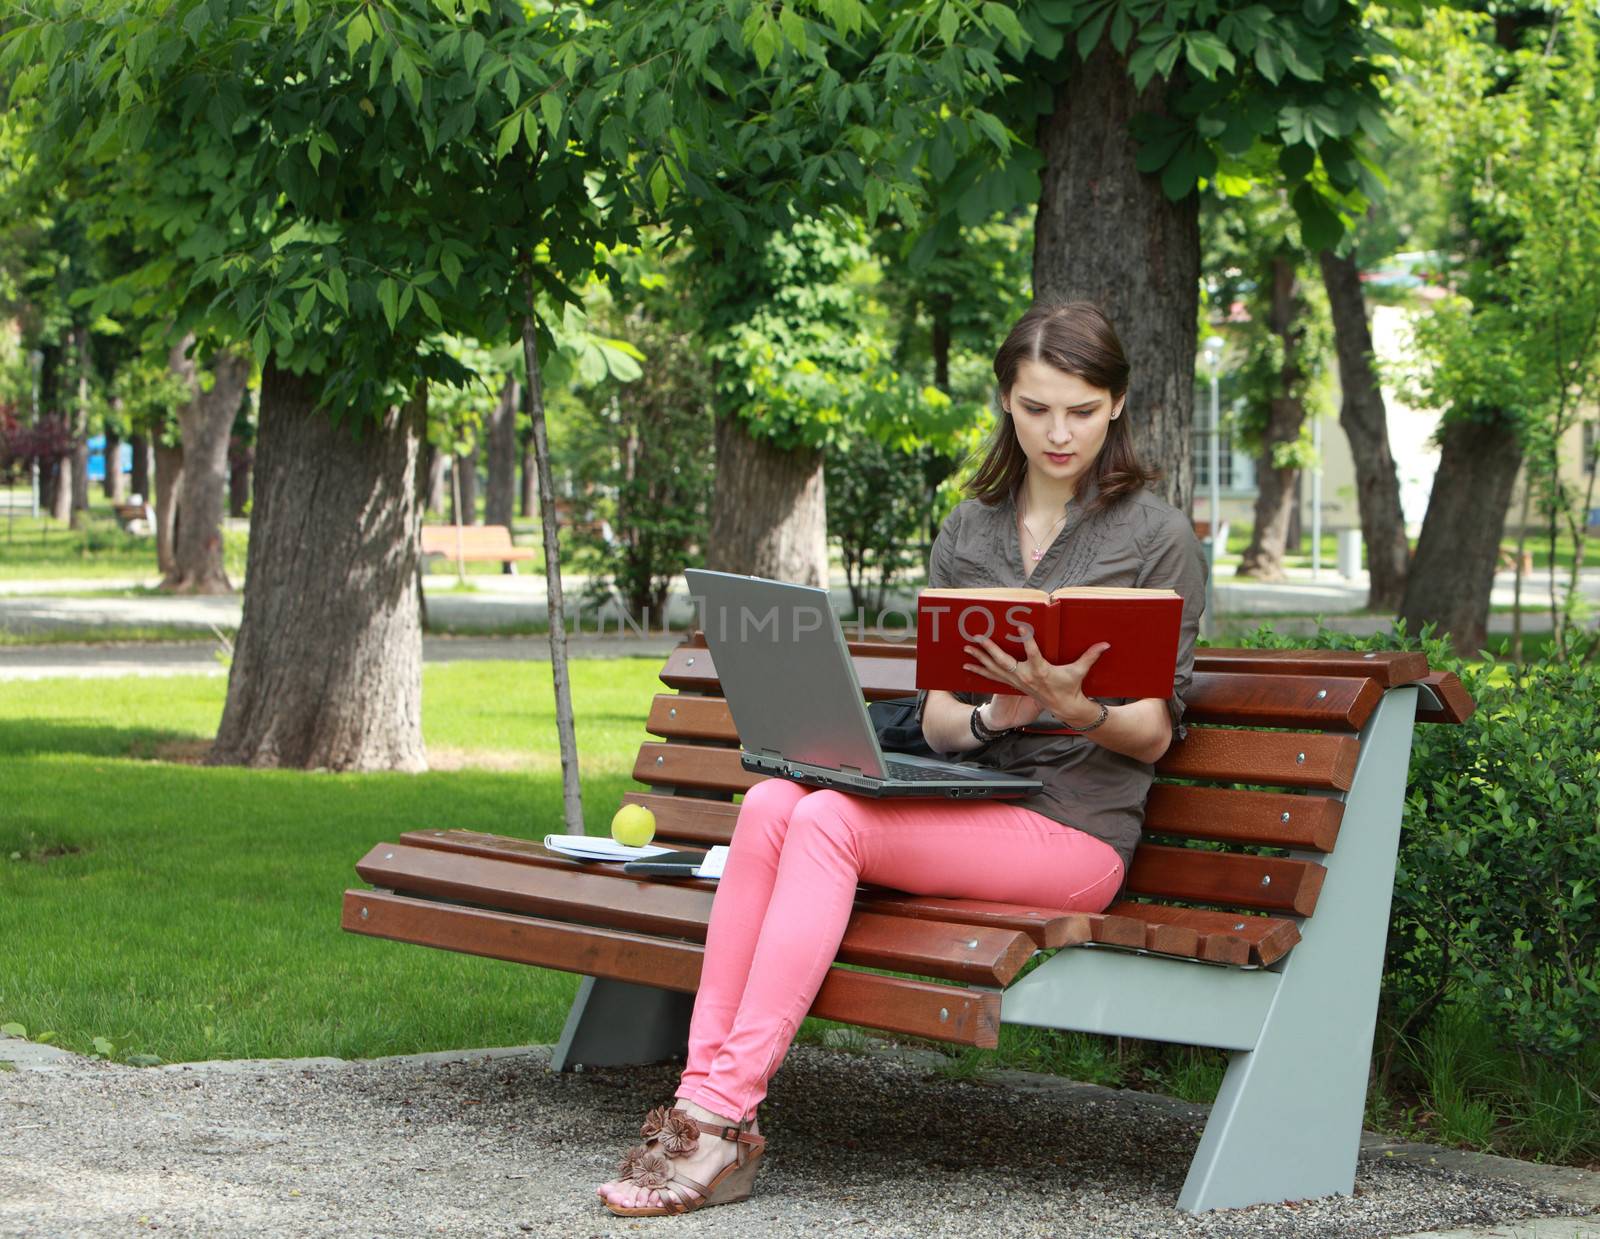 Young woman with a laptop reading a book and sitting on a bench outside in a park in summer.